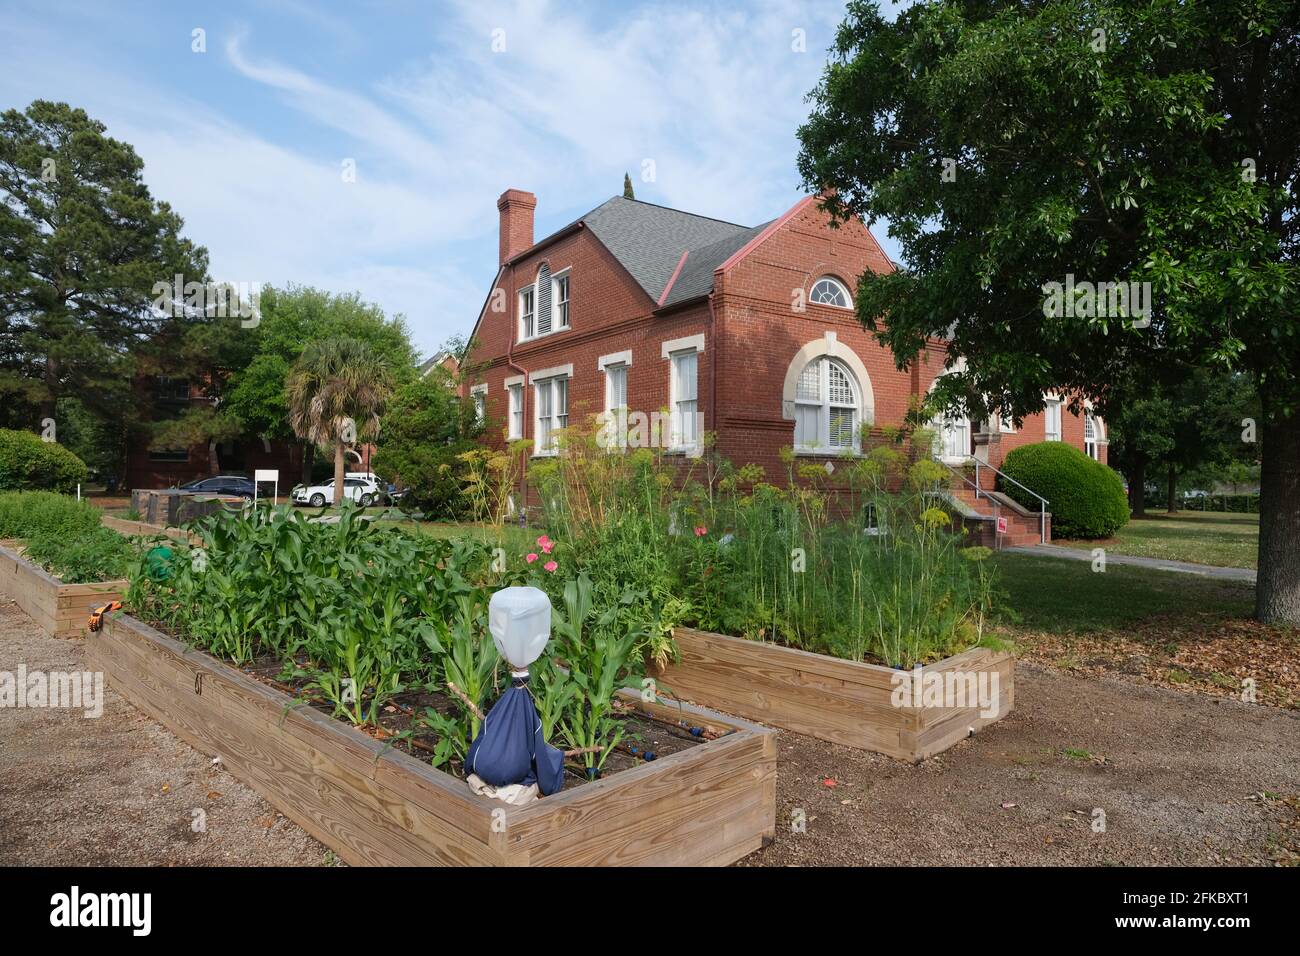 Urban Garden at Enston Home for aged built as English Village as founder William Enston remembered his English home. Stock Photo